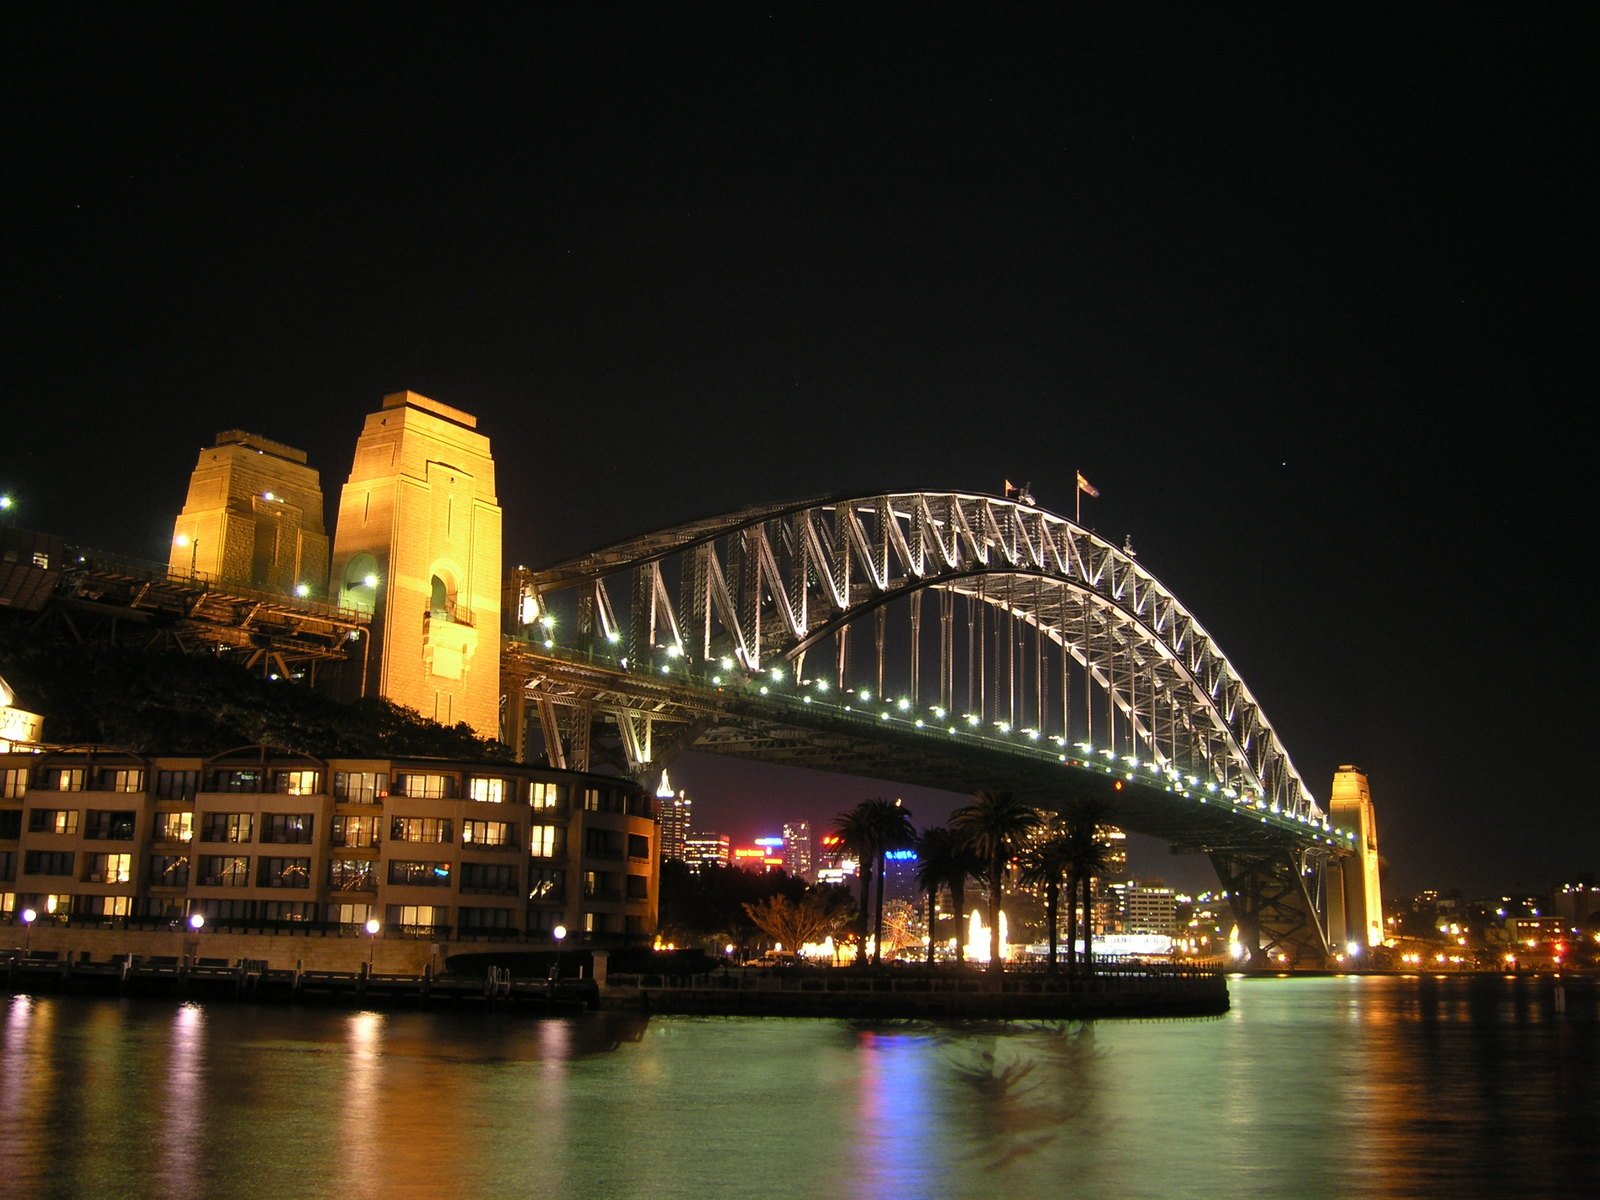 a nighttime po taken from a riverfront overlooking the sydney harbour bridge